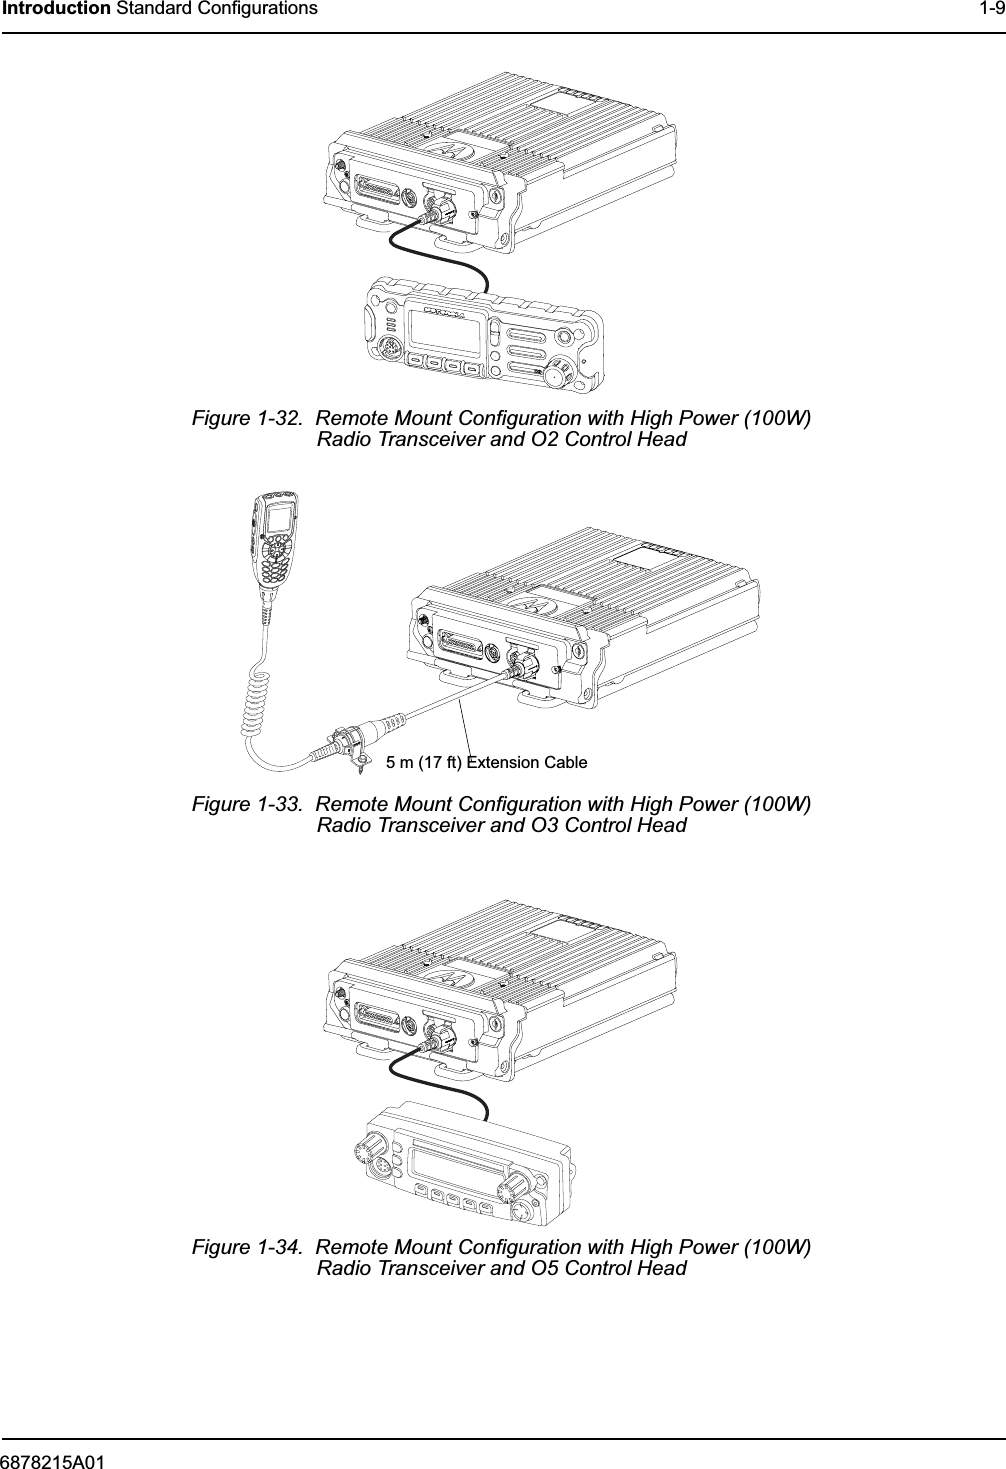 6878215A01Introduction Standard Configurations 1-9Figure 1-32.  Remote Mount Configuration with High Power (100W)Radio Transceiver and O2 Control HeadFigure 1-33.  Remote Mount Configuration with High Power (100W)Radio Transceiver and O3 Control HeadFigure 1-34.  Remote Mount Configuration with High Power (100W)Radio Transceiver and O5 Control Head5 m (17 ft) Extension Cable